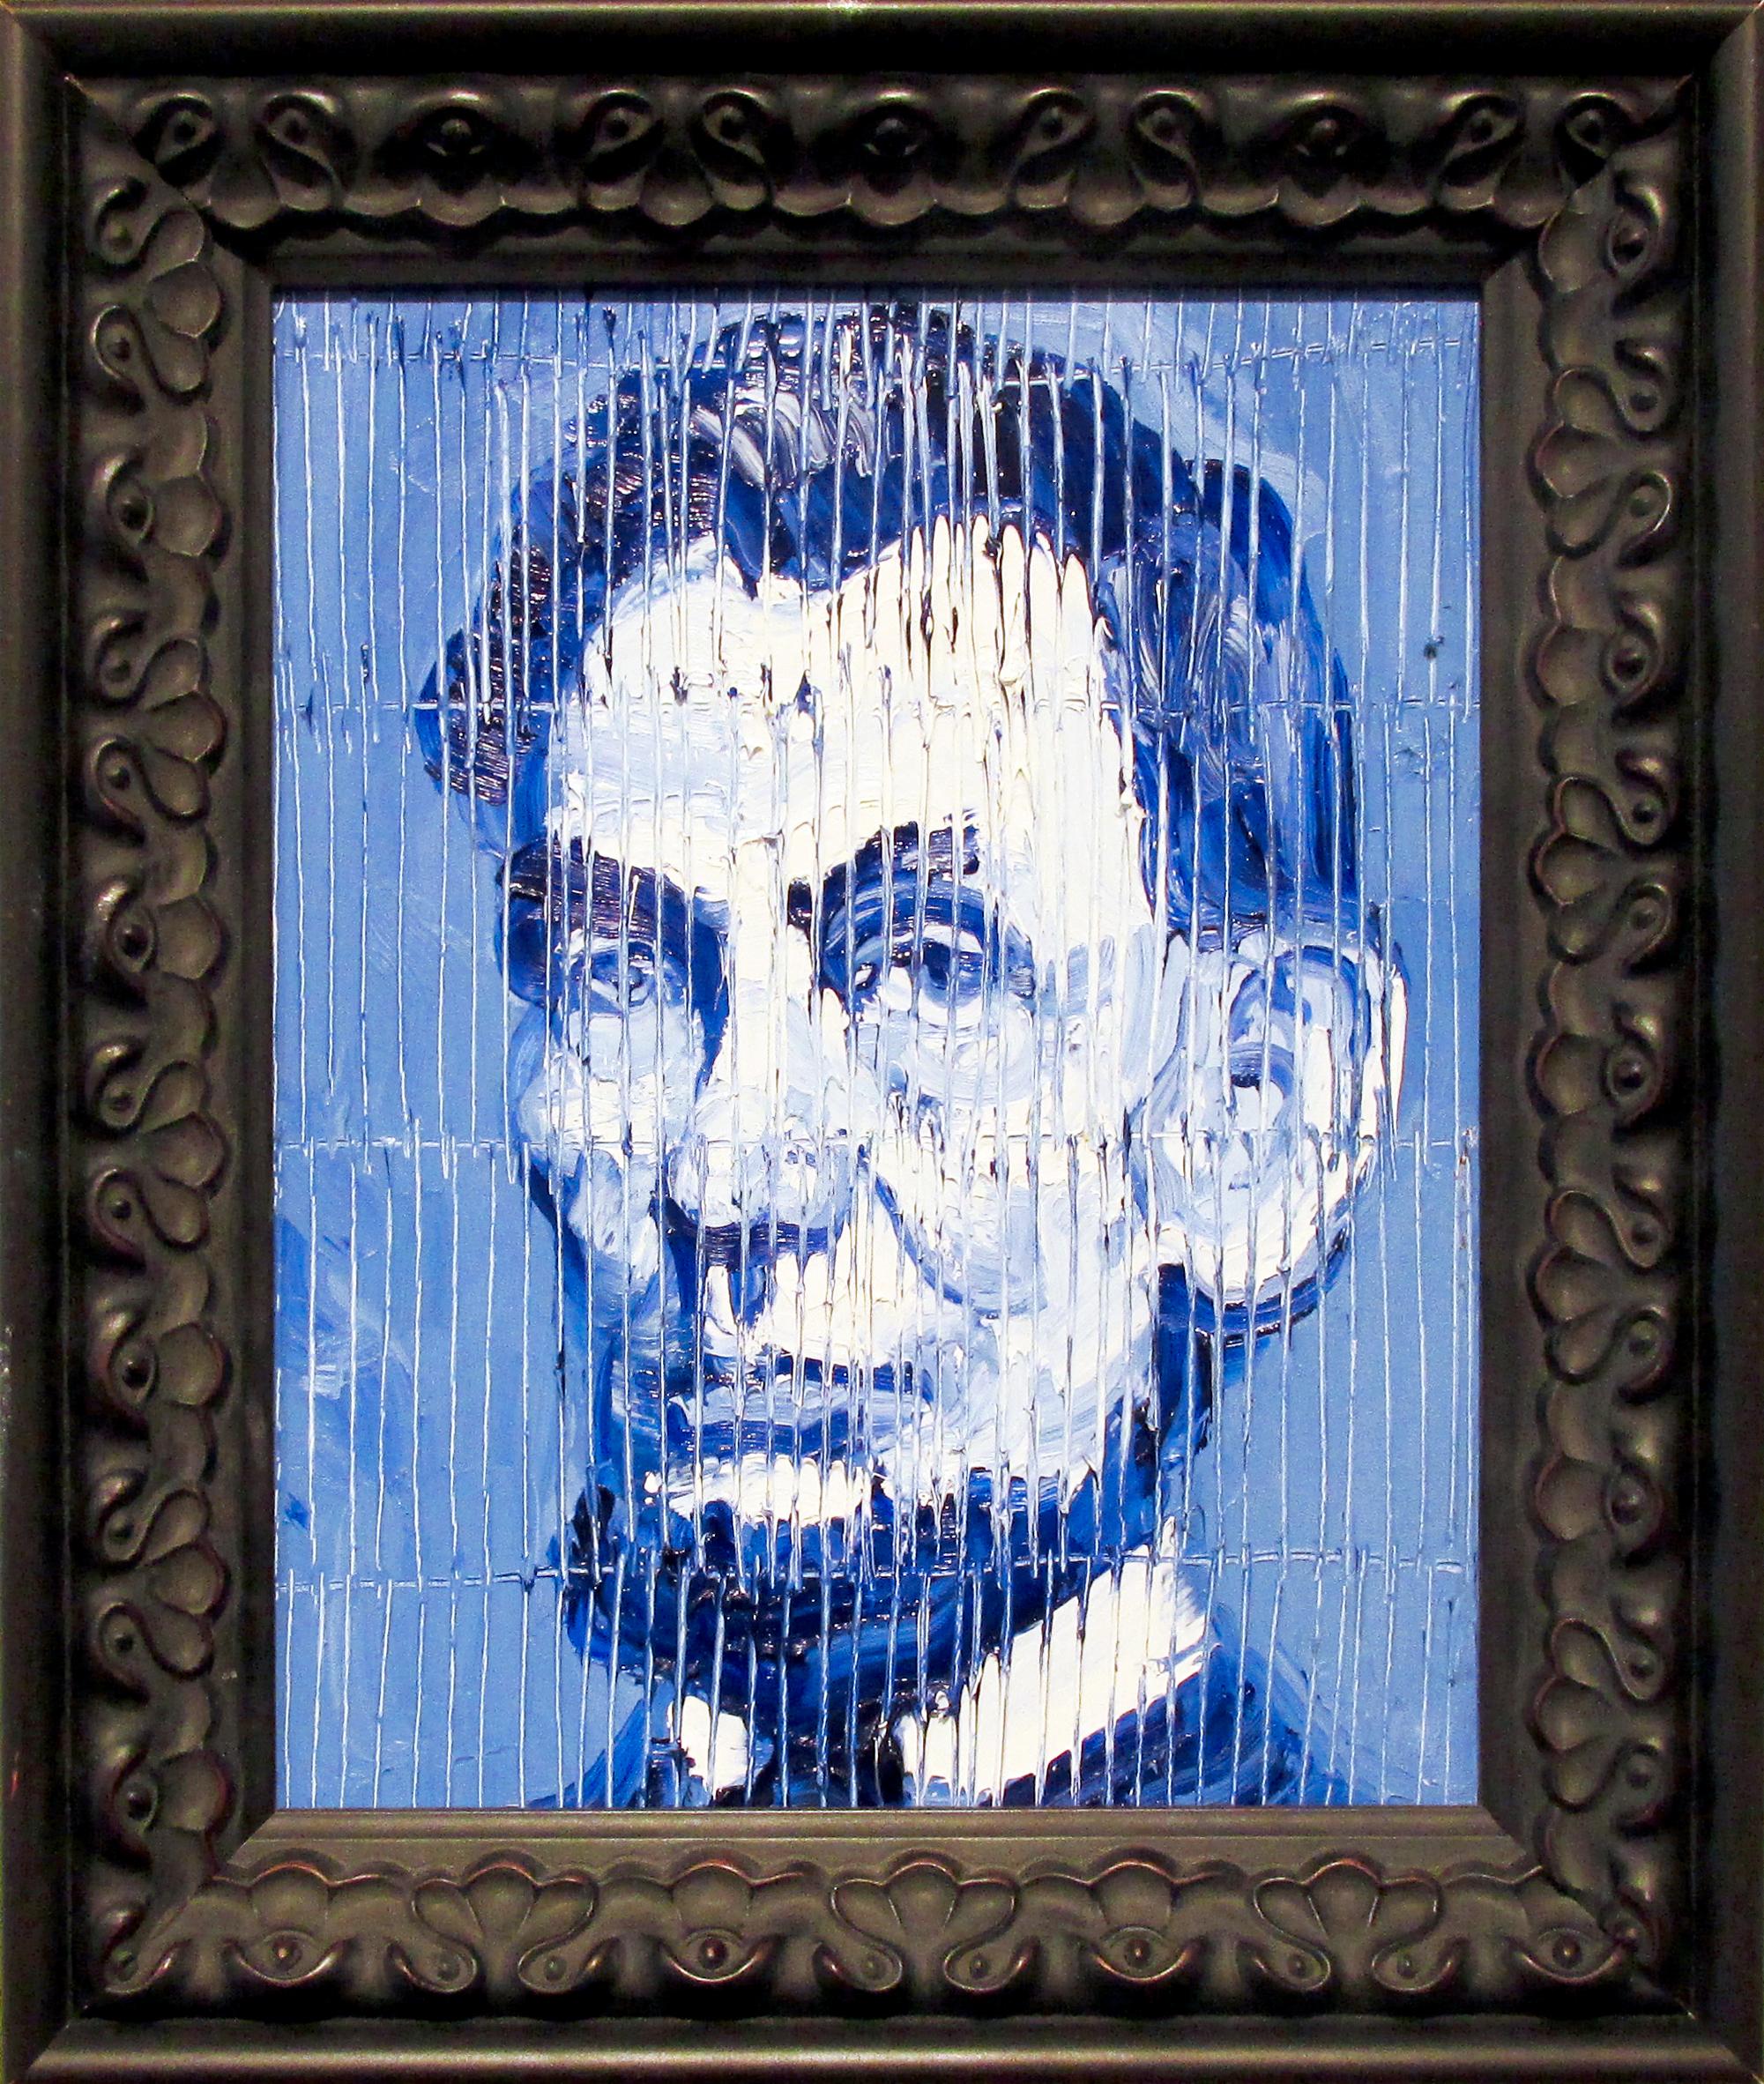 Abe Lincoln - Painting by Hunt Slonem